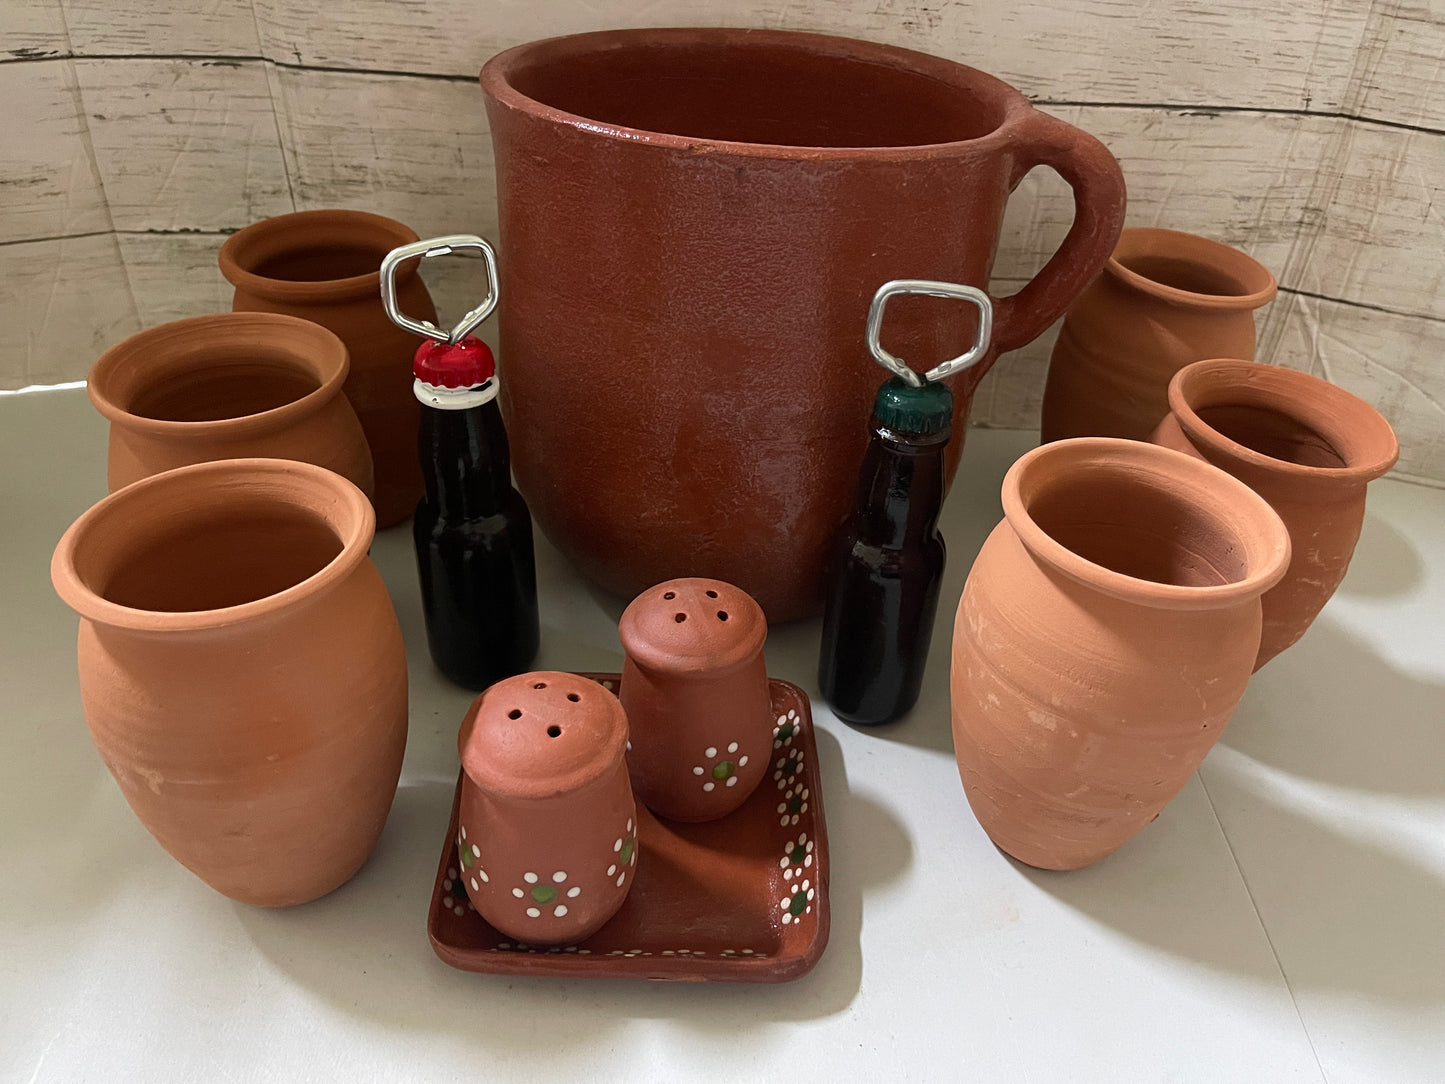 Party Set Mexicano/Mexico party pack/terracotta party pack/beer cooler/terracotta beer cooler pack/party gift set/mexico gift set